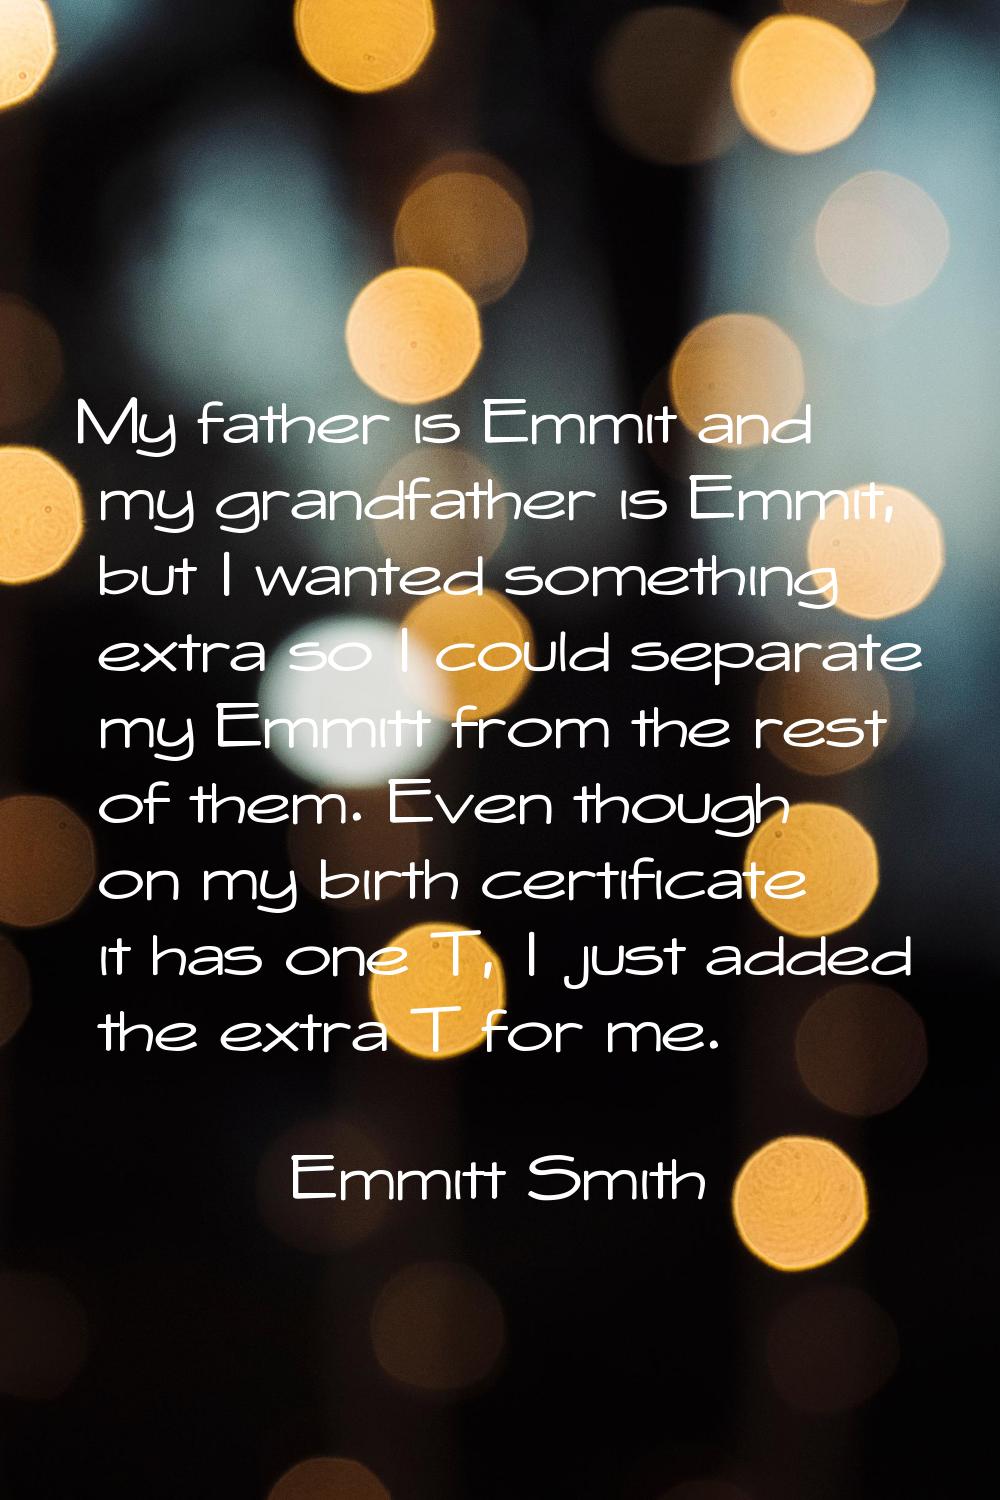 My father is Emmit and my grandfather is Emmit, but I wanted something extra so I could separate my